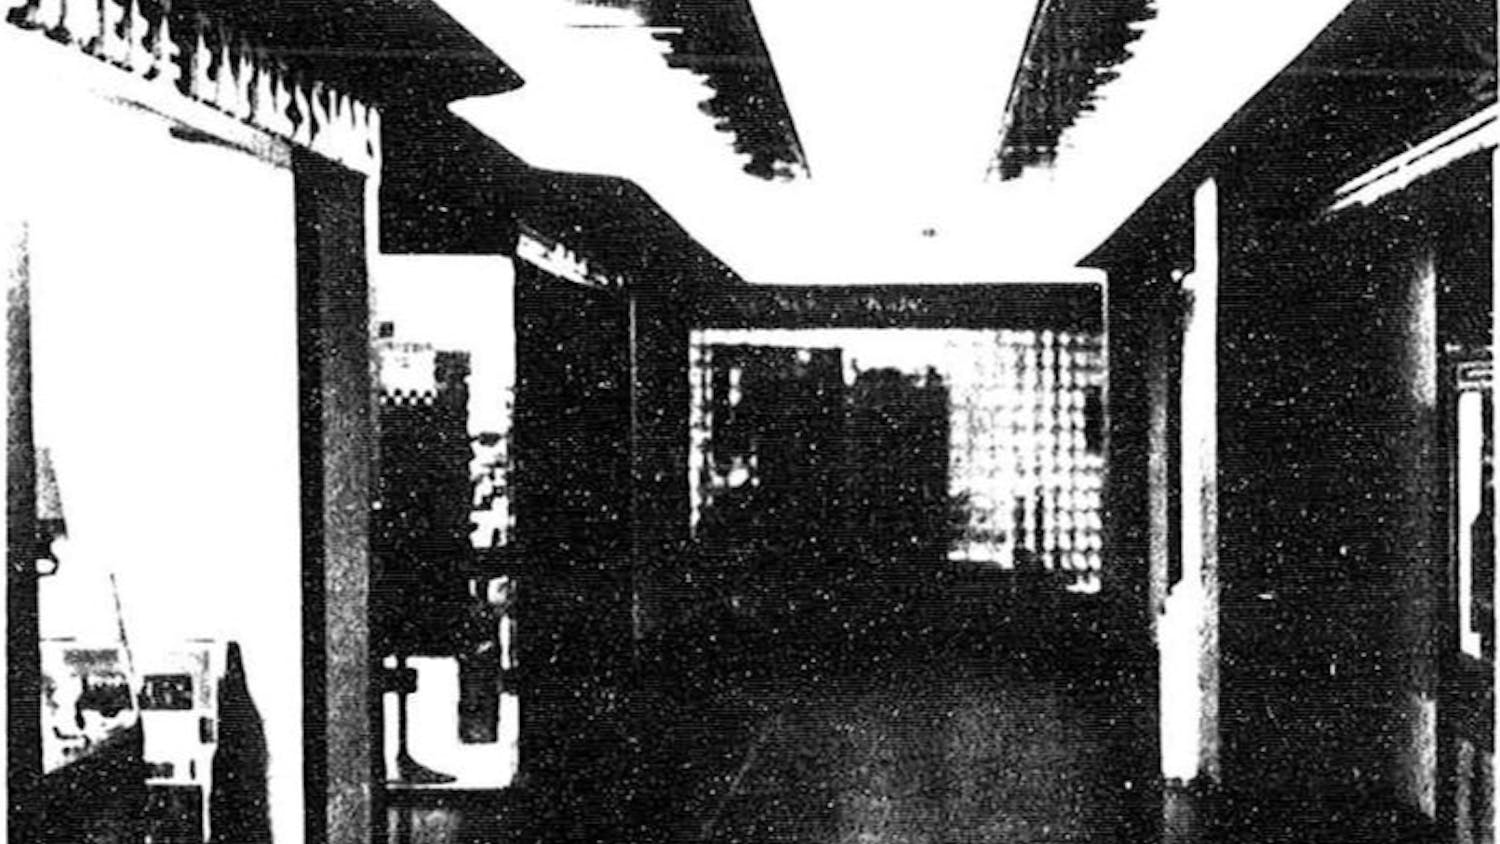 A black and white photo of Russell House's basement in 1985. During the 1980s, Carolina Mall existed in Russell House's basement, carrying shops and dining locations for students.